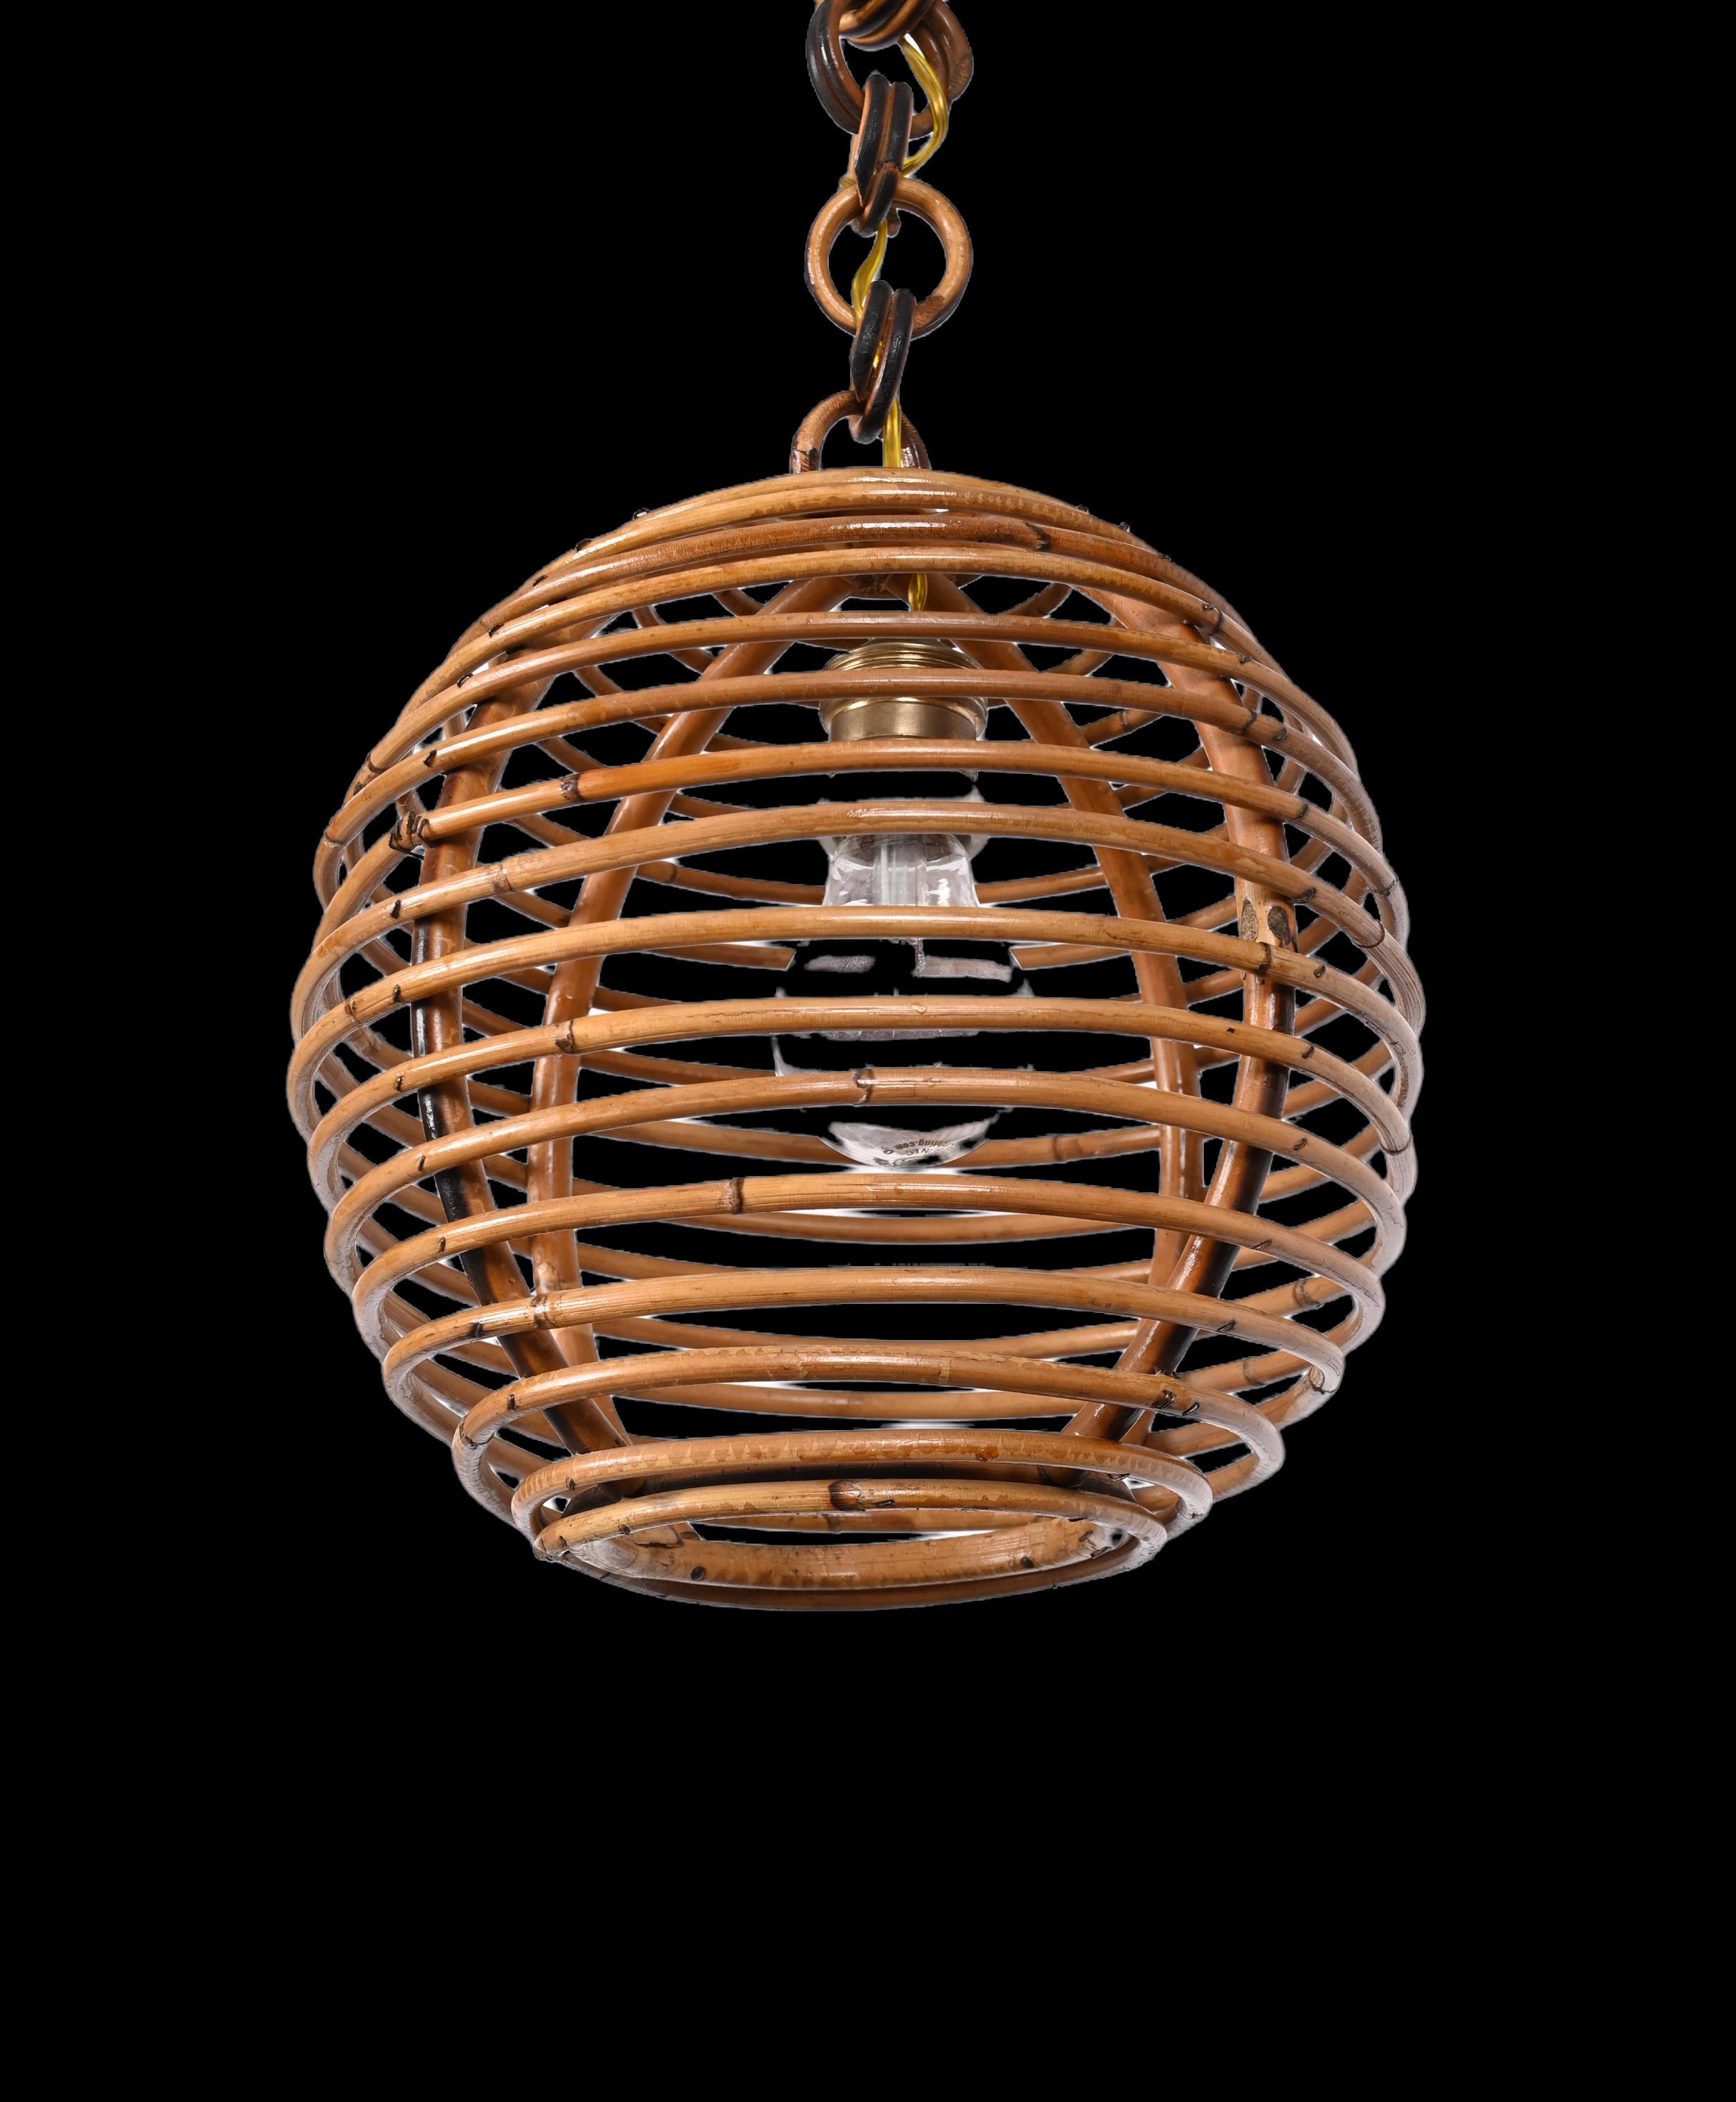 Midcentury French Riviera Bambo and Rattan Spherical Italian Chandelier, 1960s For Sale 6